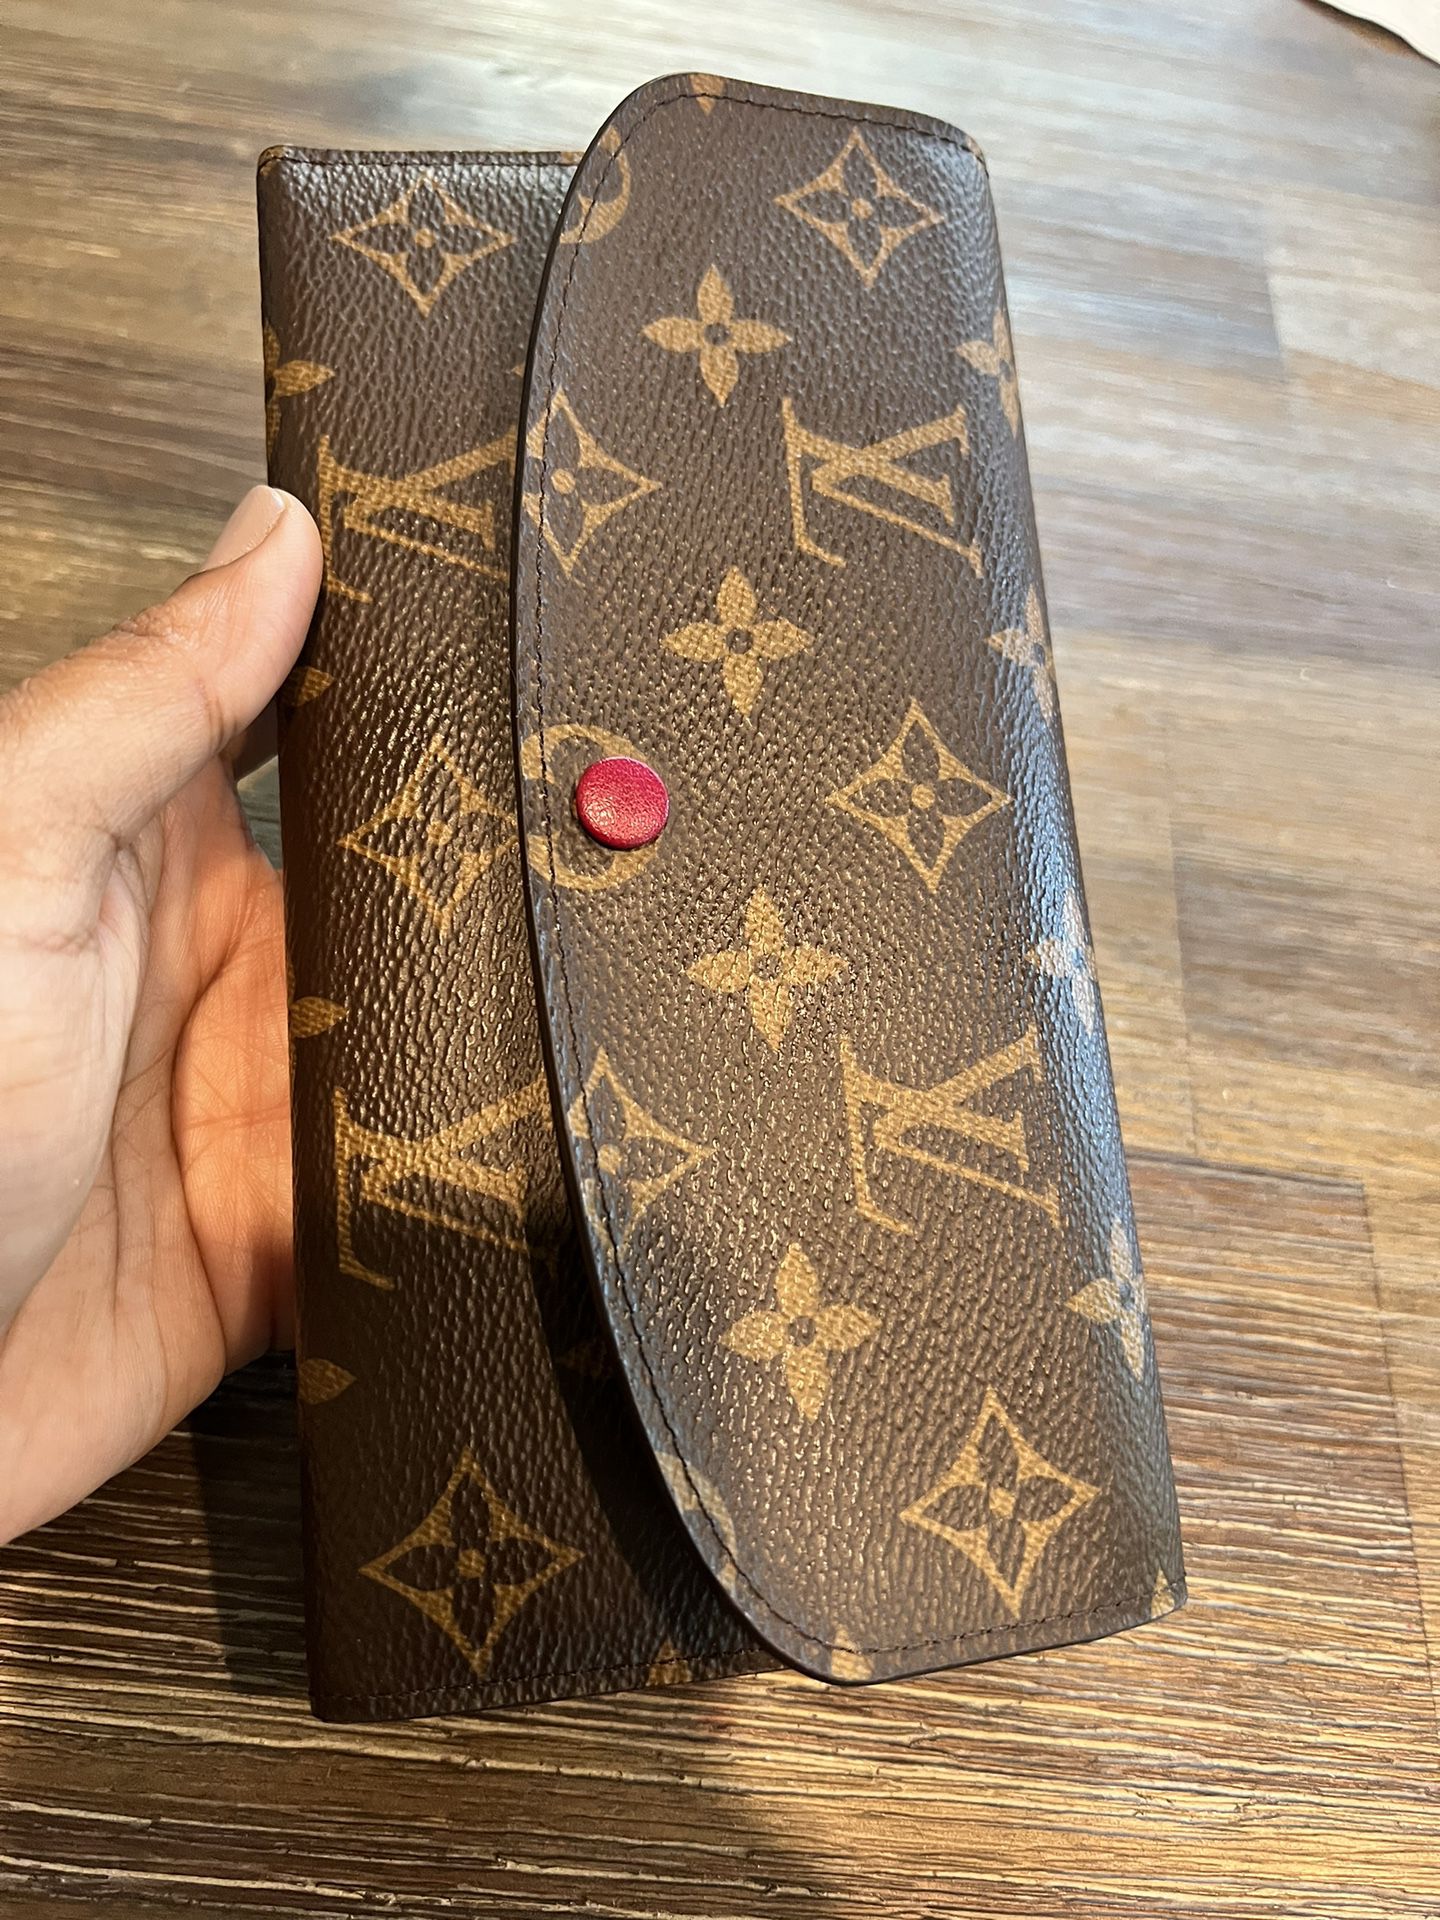 LOUIS VUITTON EMILIE WALLET AND HOW TO WEAR IT!! 